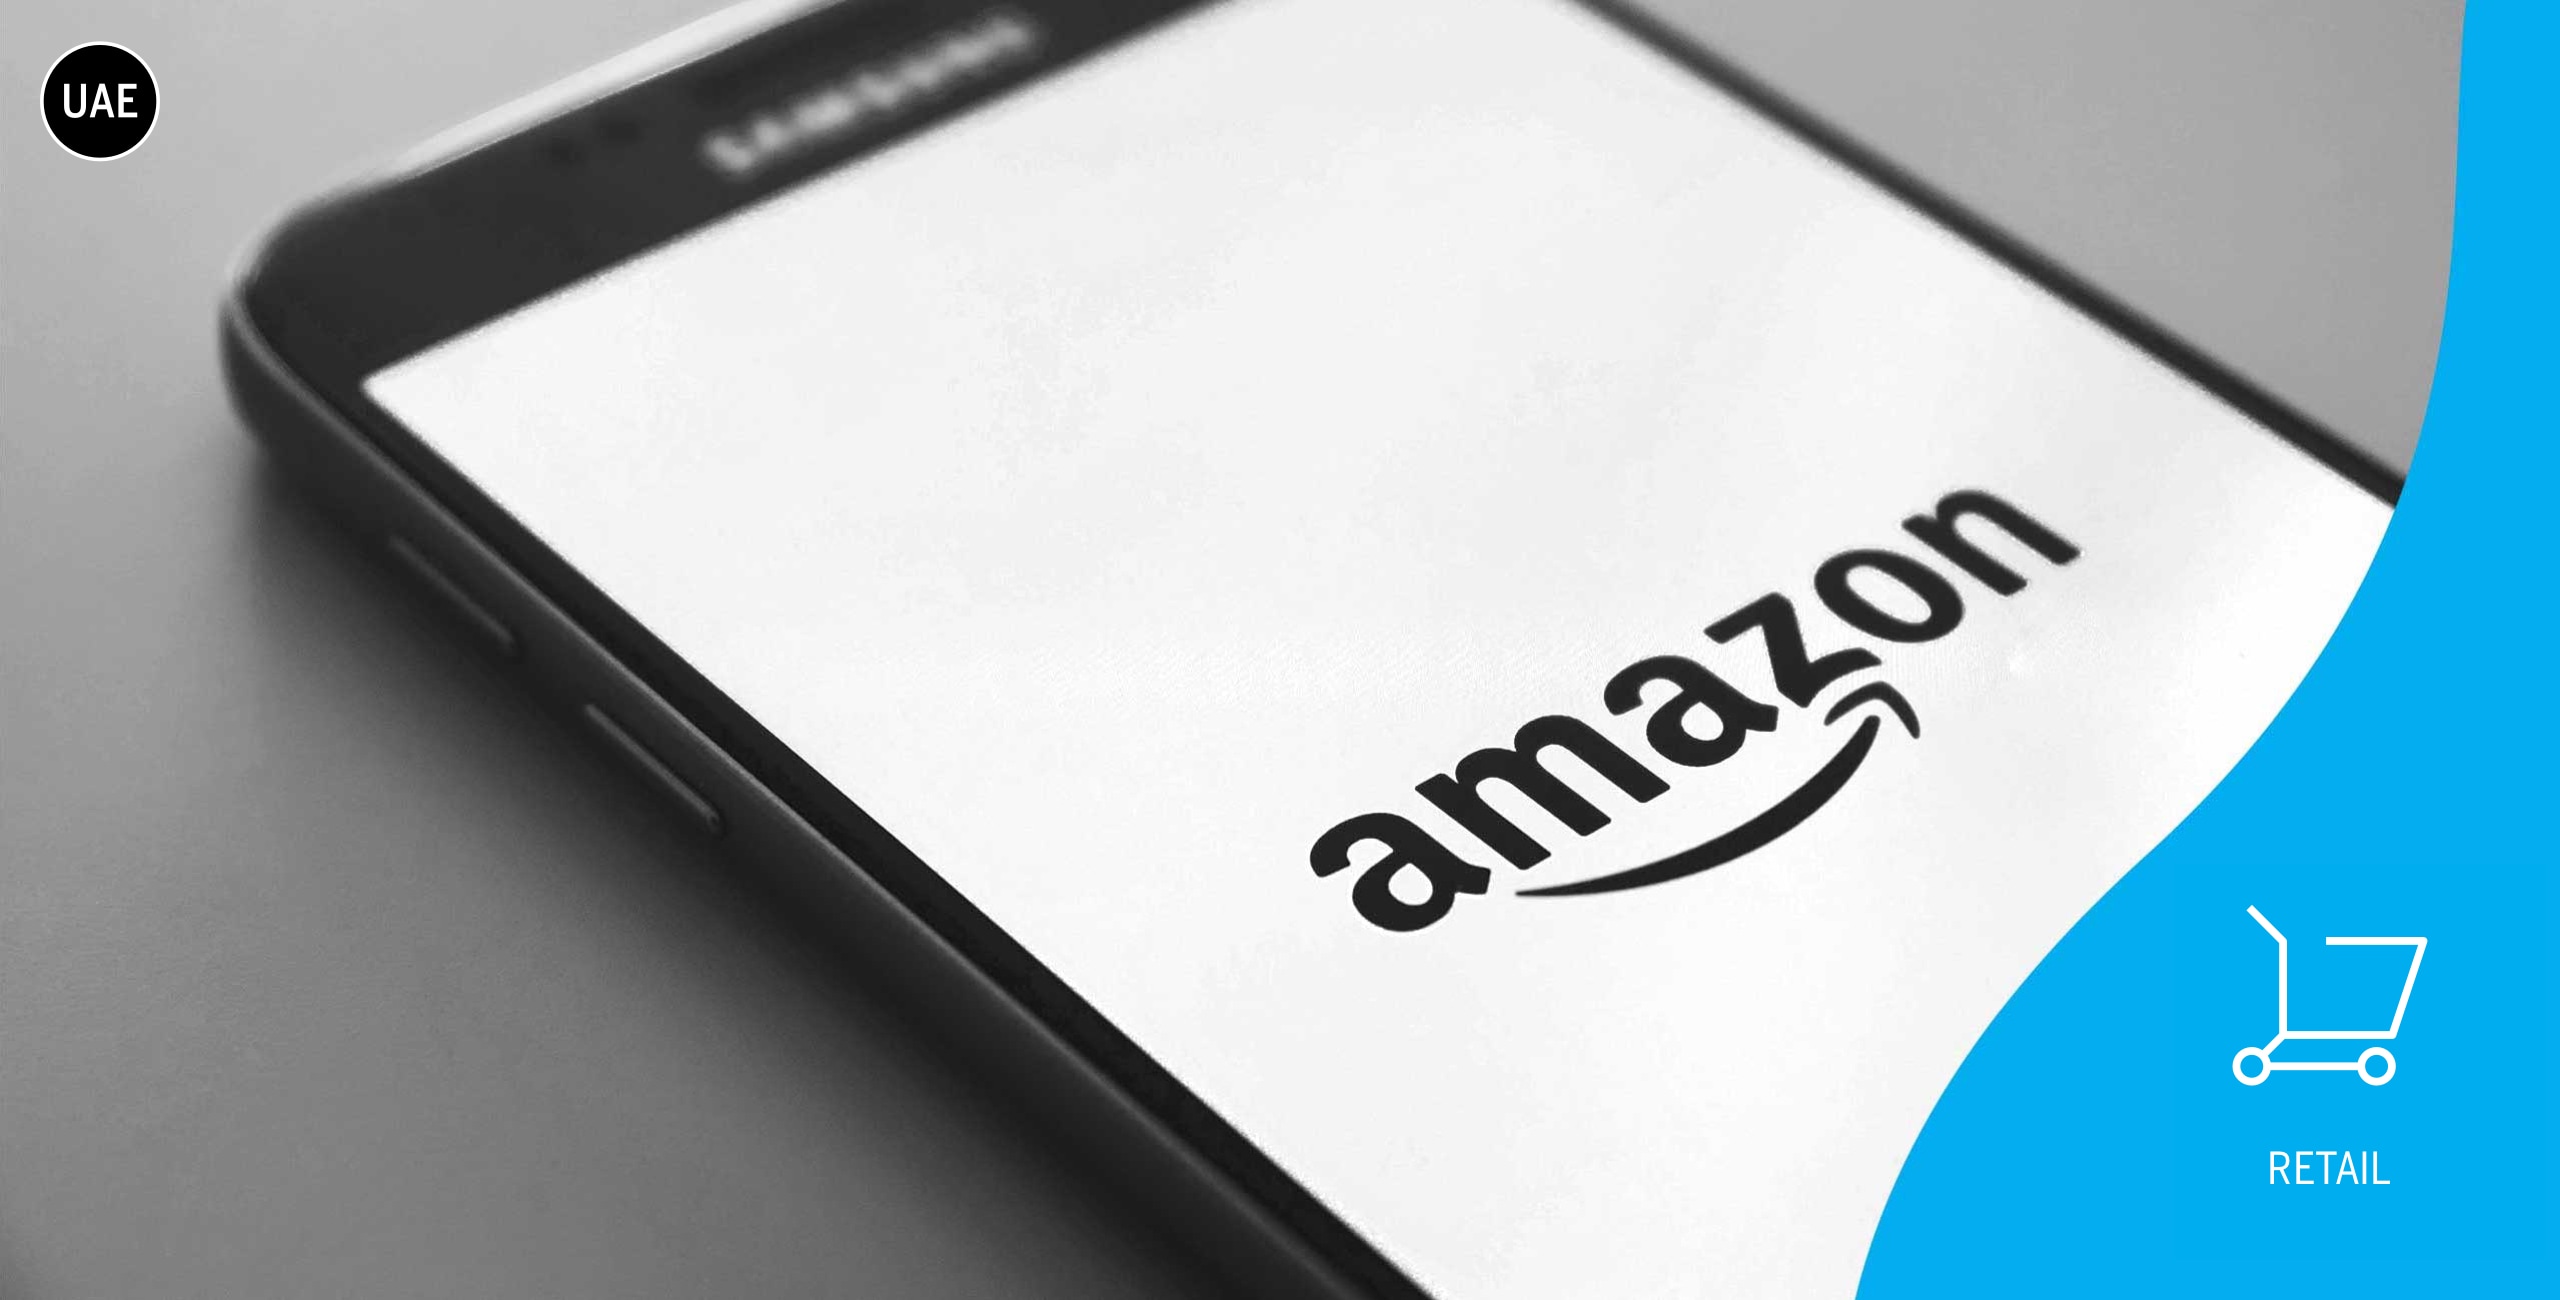 The amazon logo is displayed on a smartphone.